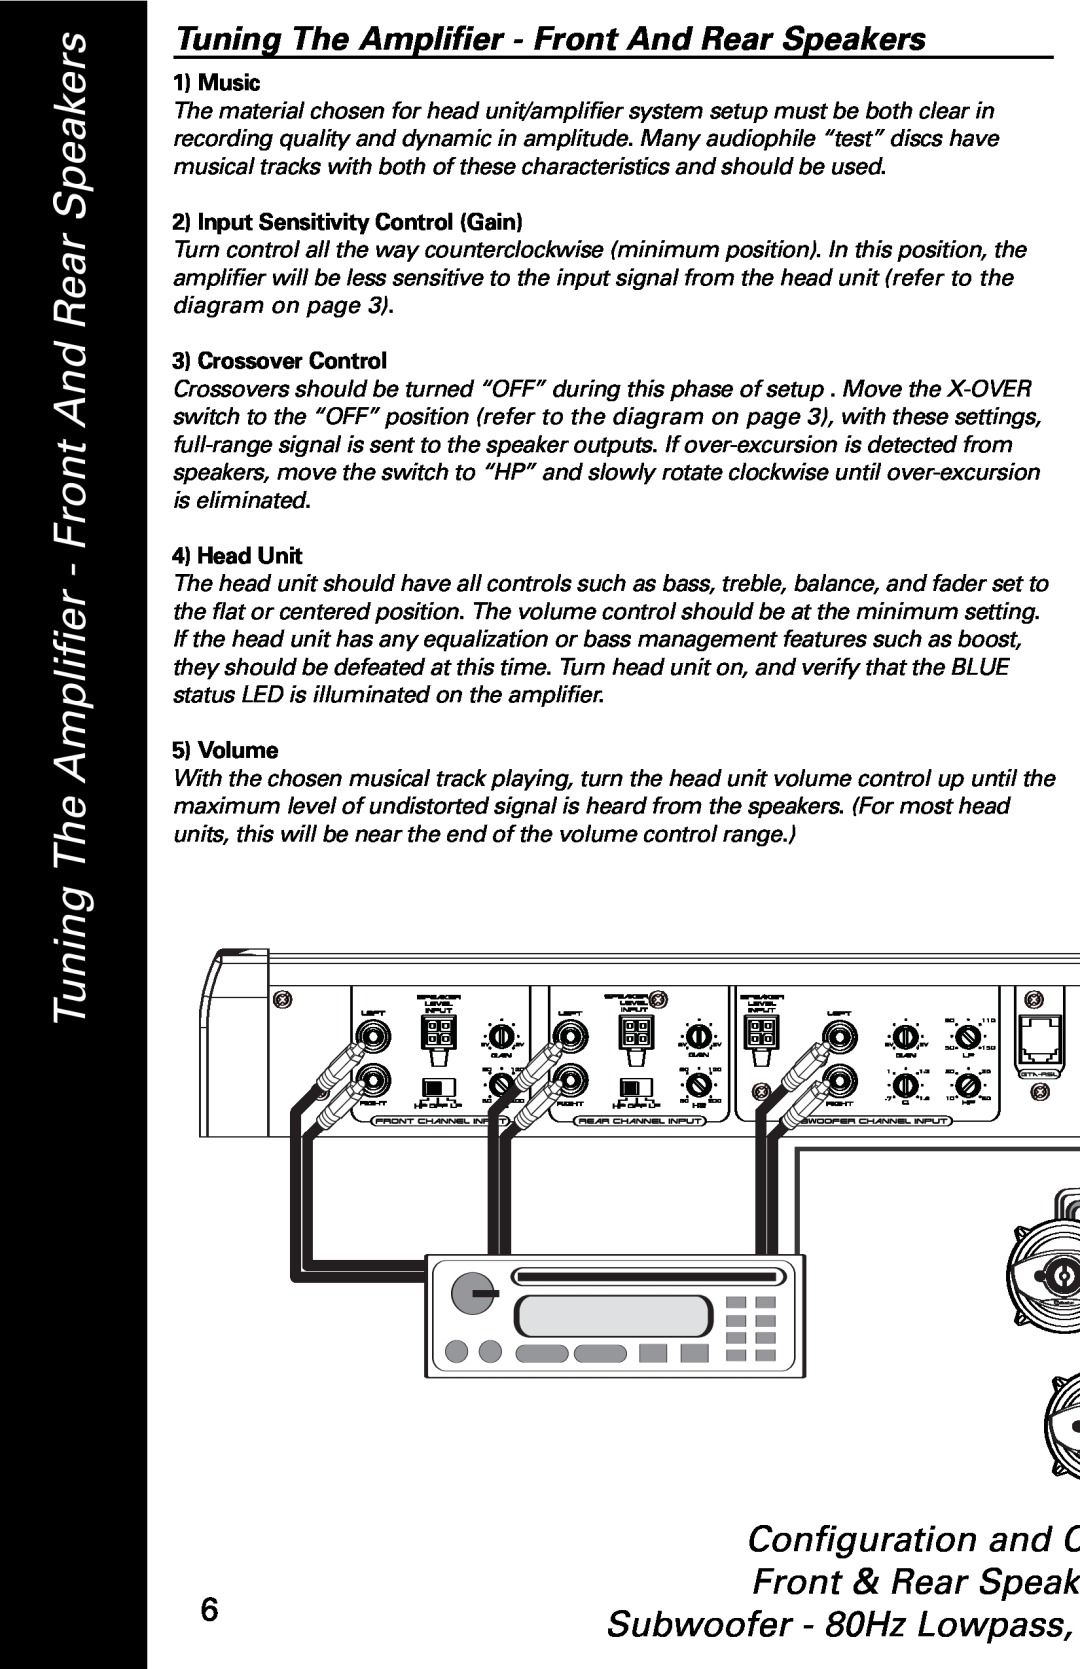 Boston Acoustics 1005 manual Tuning The Amplifier - Front And Rear Speakers, Configuration and C Front & Rear Speak, Music 